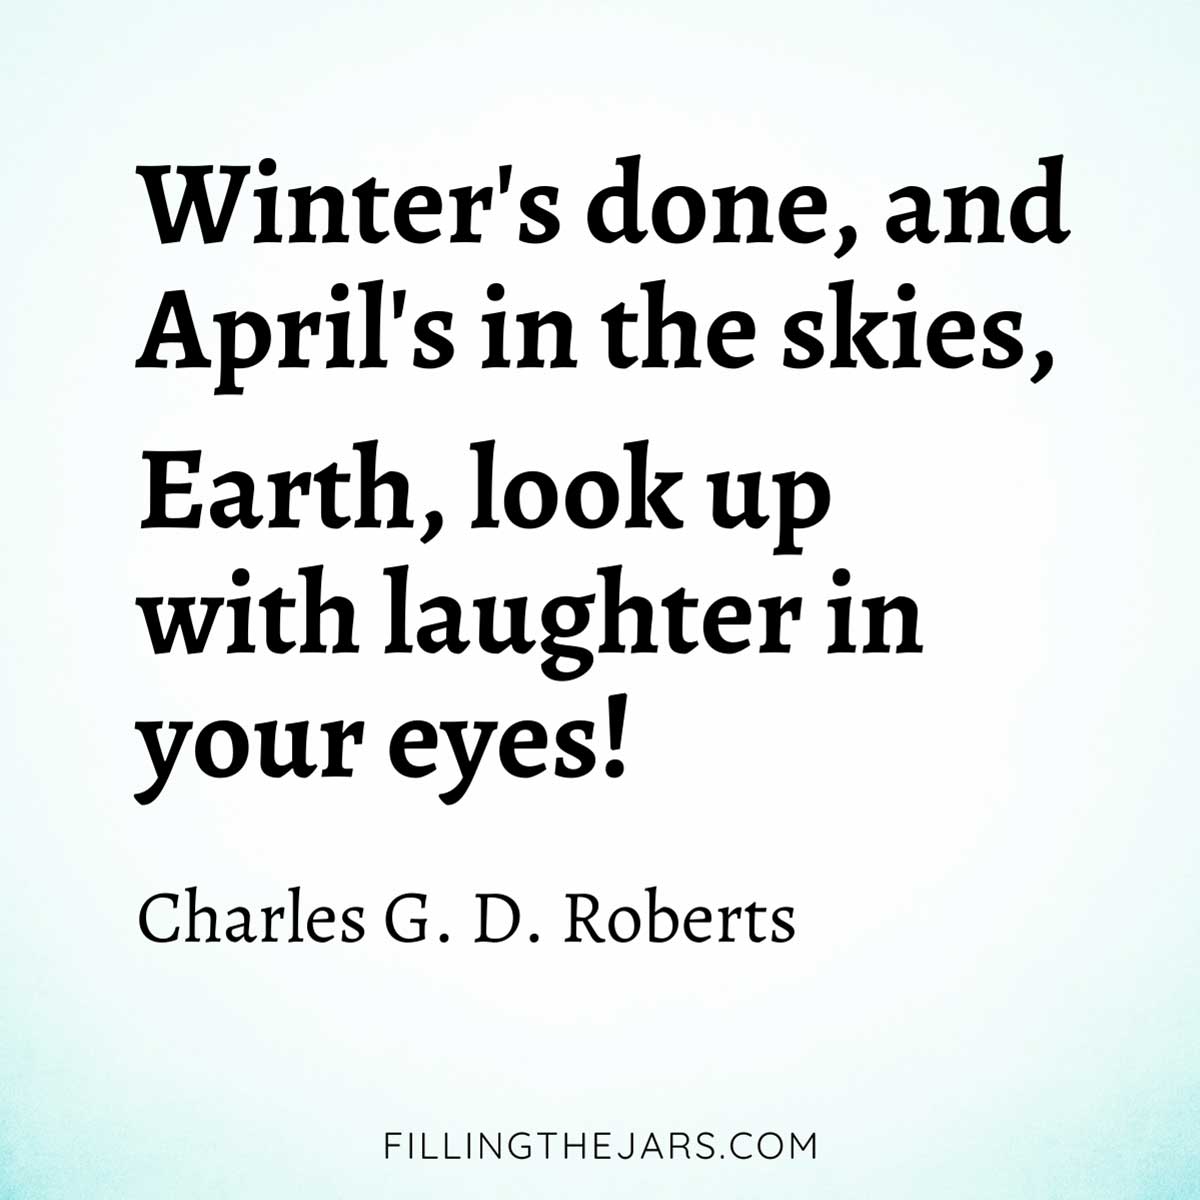 Charles Roberts April in the skies quote in black text on white and turquoise background.